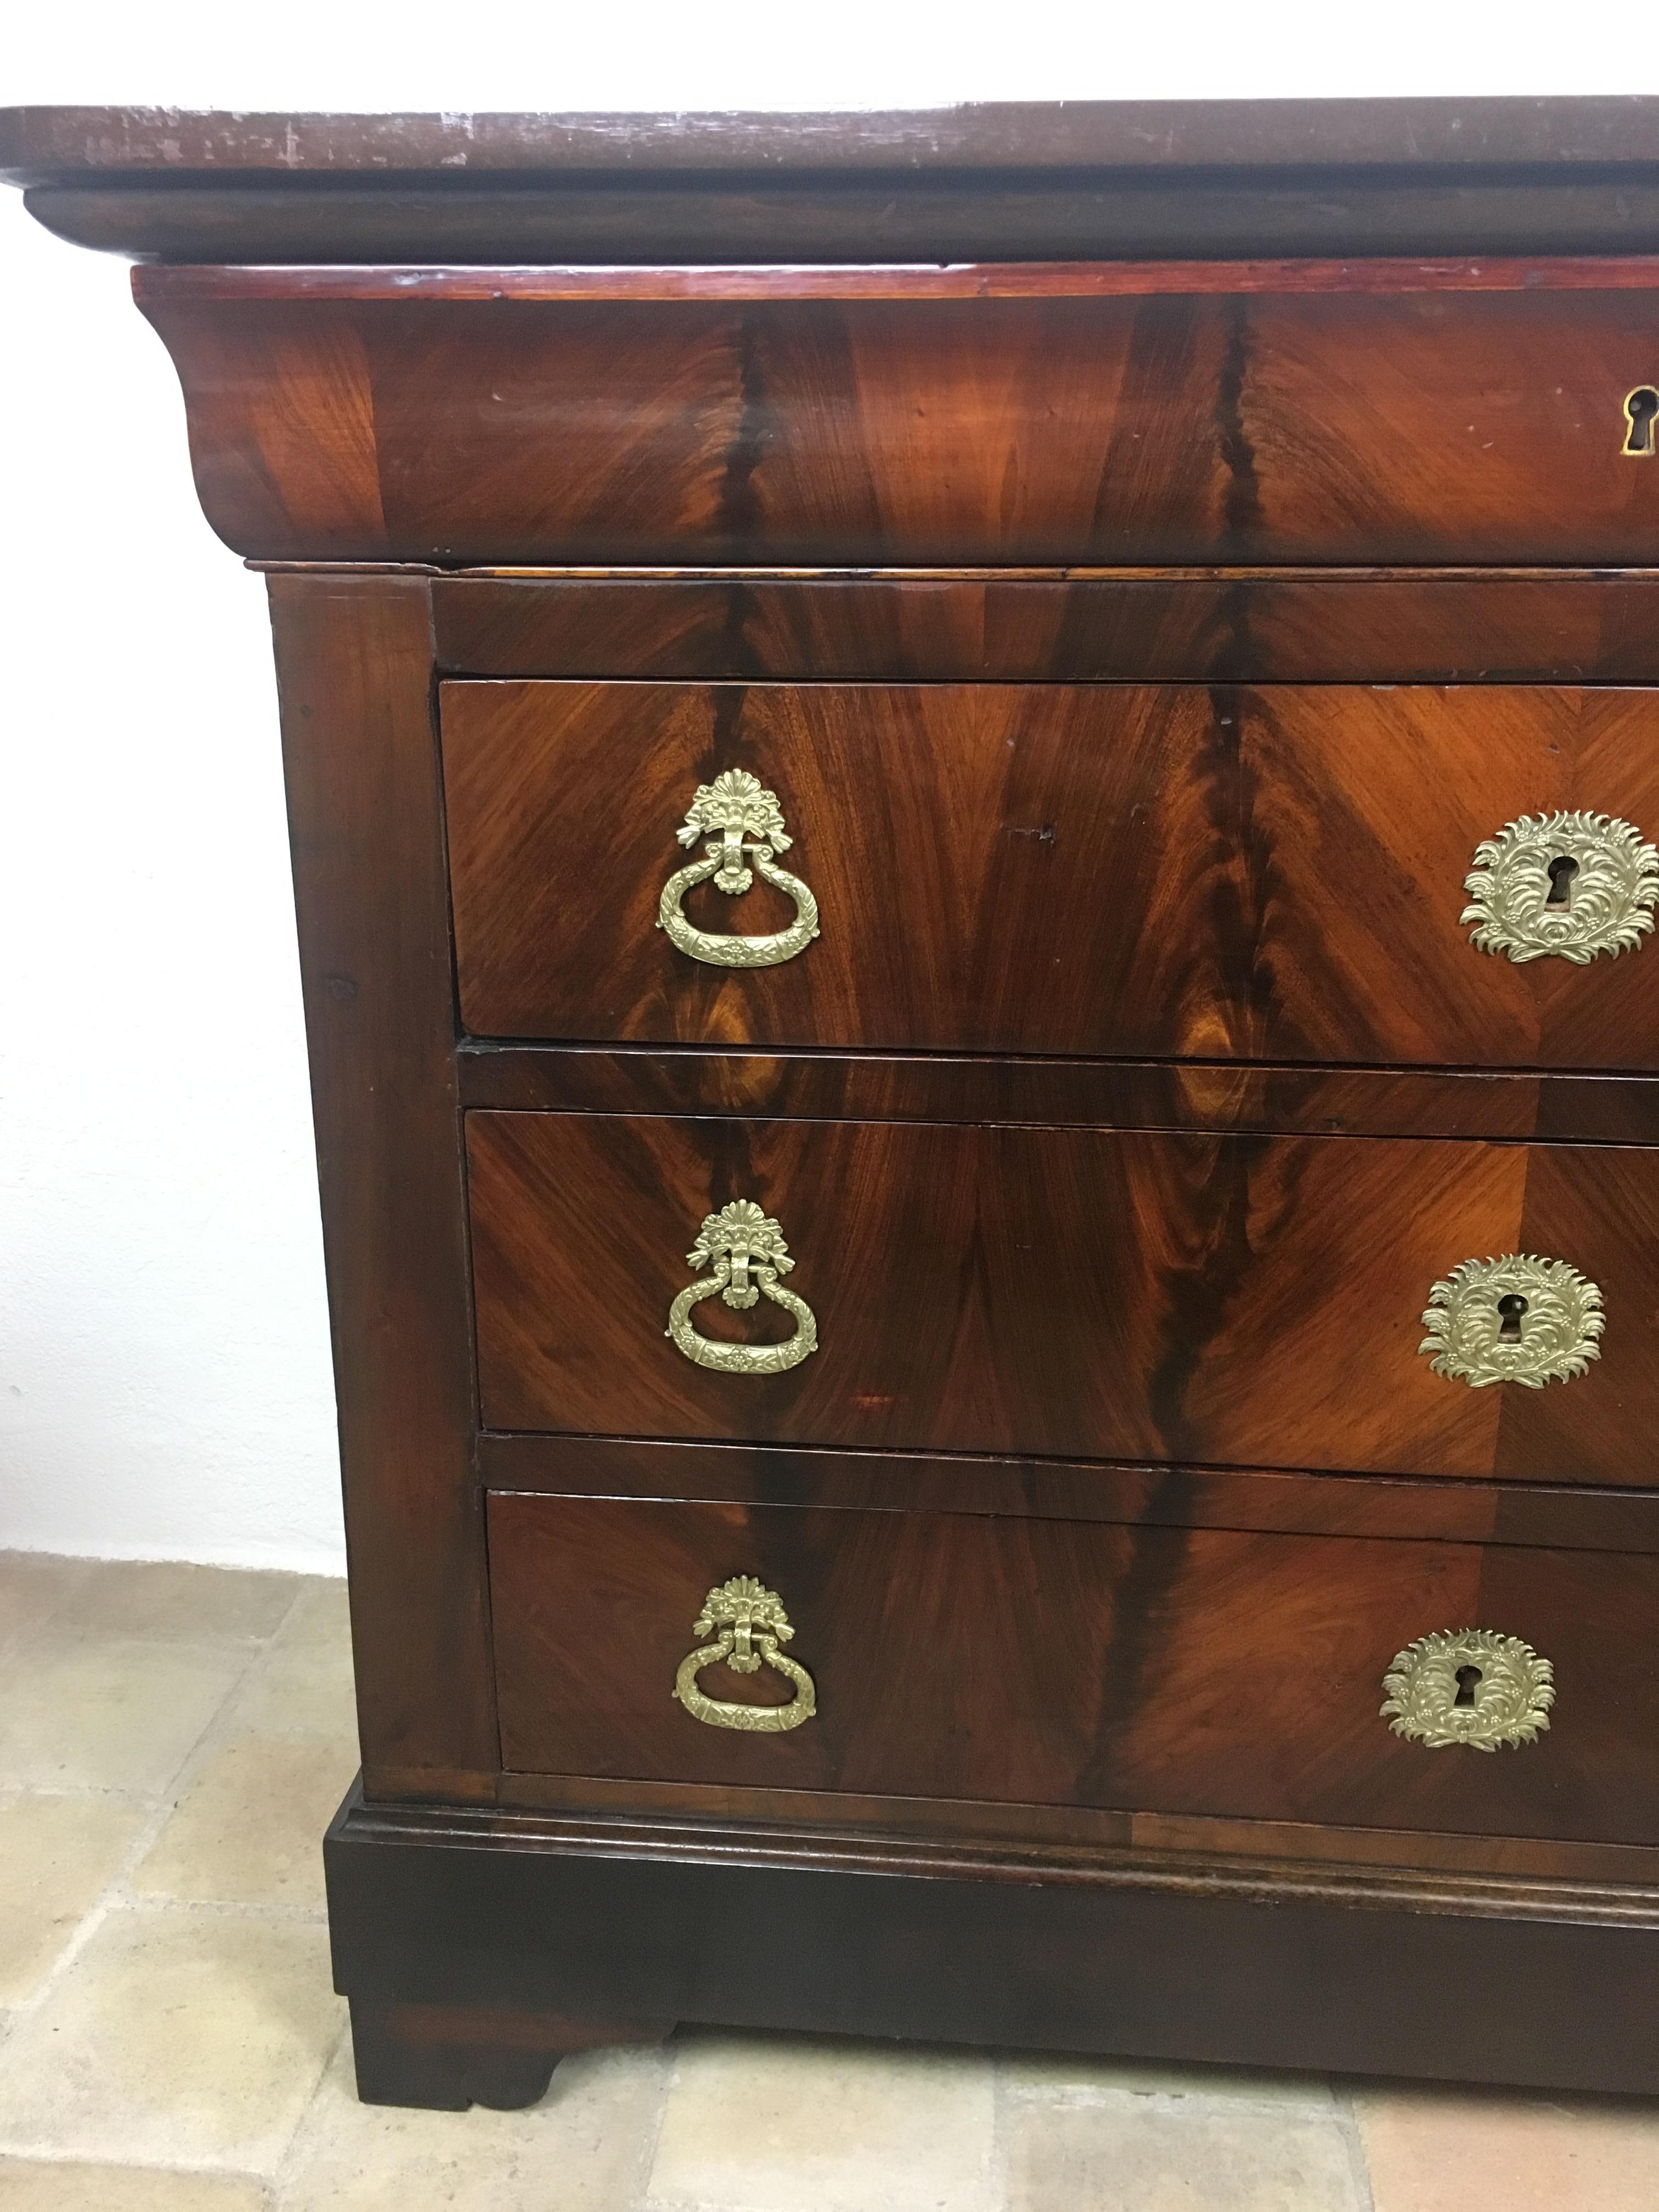 A fine French Louis Philippe period commode made of solid flame mahogany and veneer. Featuring four long fitted drawers with brass keyholes for all of them. 

This piece has an original flame mahogany top, very rare, instead of the more common